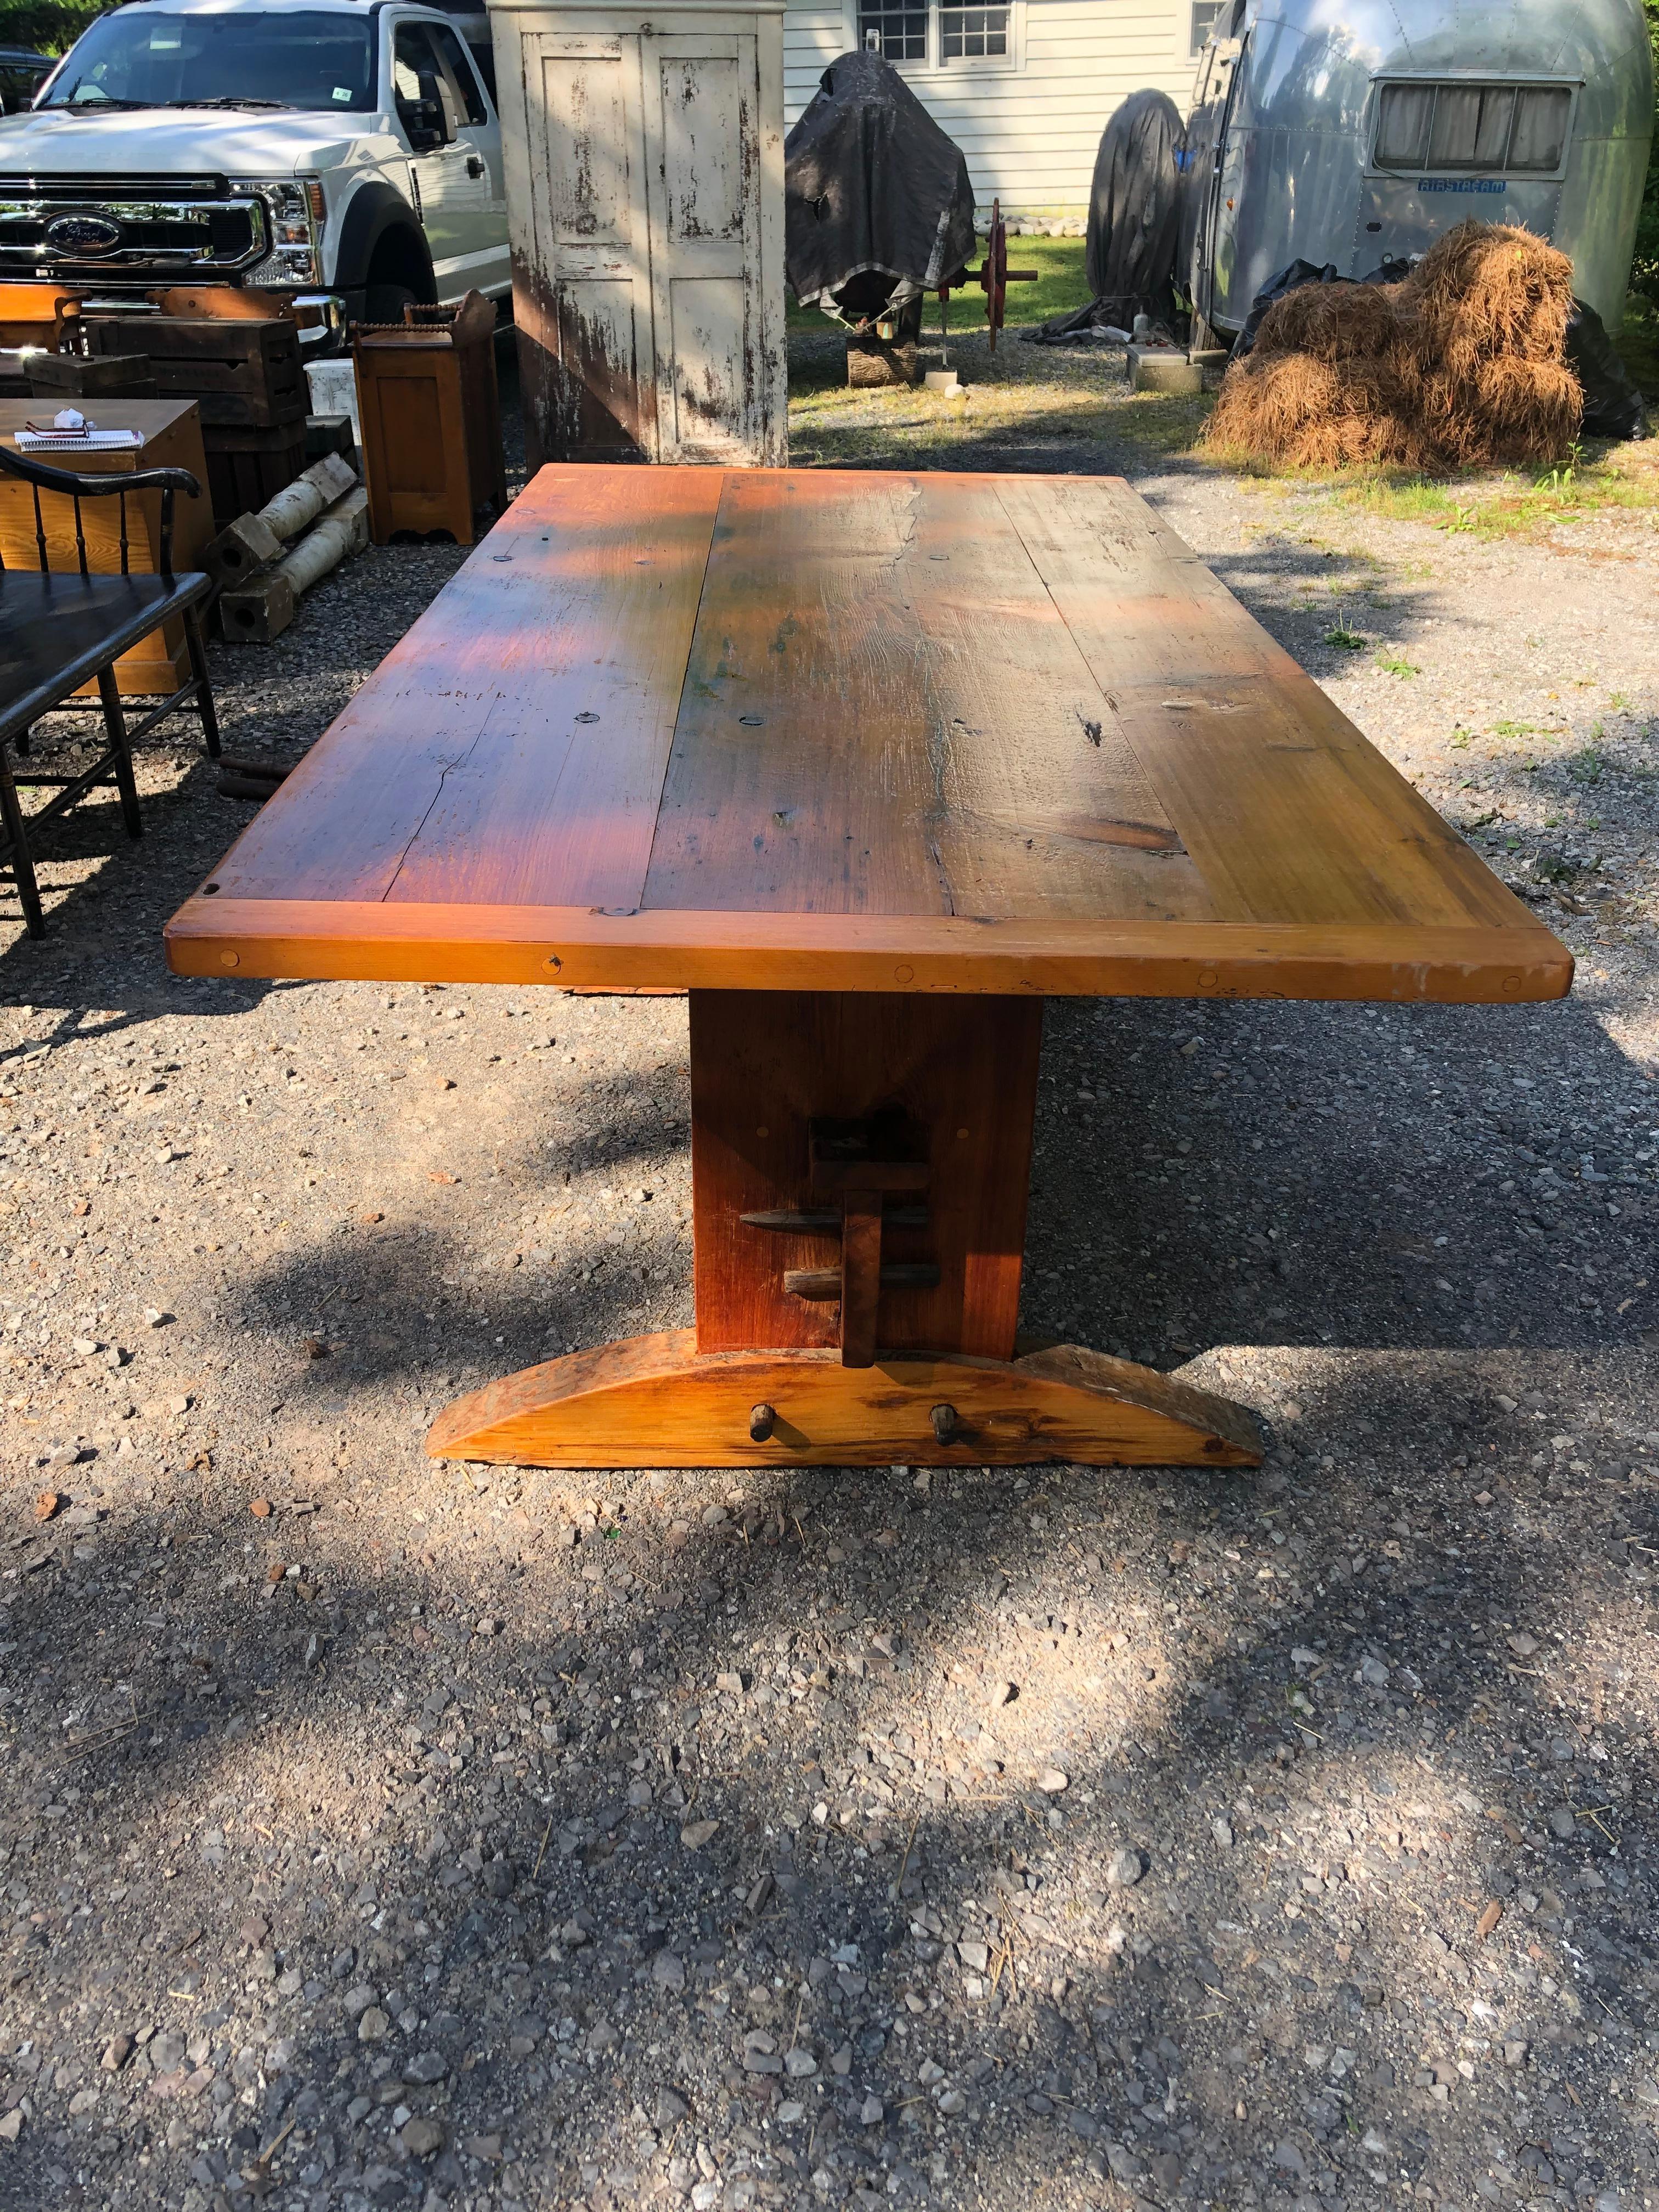 A large hand made rustic pine farm table oozing with character. Top is old reclaimed wood with knots and indigenous imperfections, base is hand hewn with bottom shelf and insertable pegs so the tabletop can be tilted upright and the piece transforms